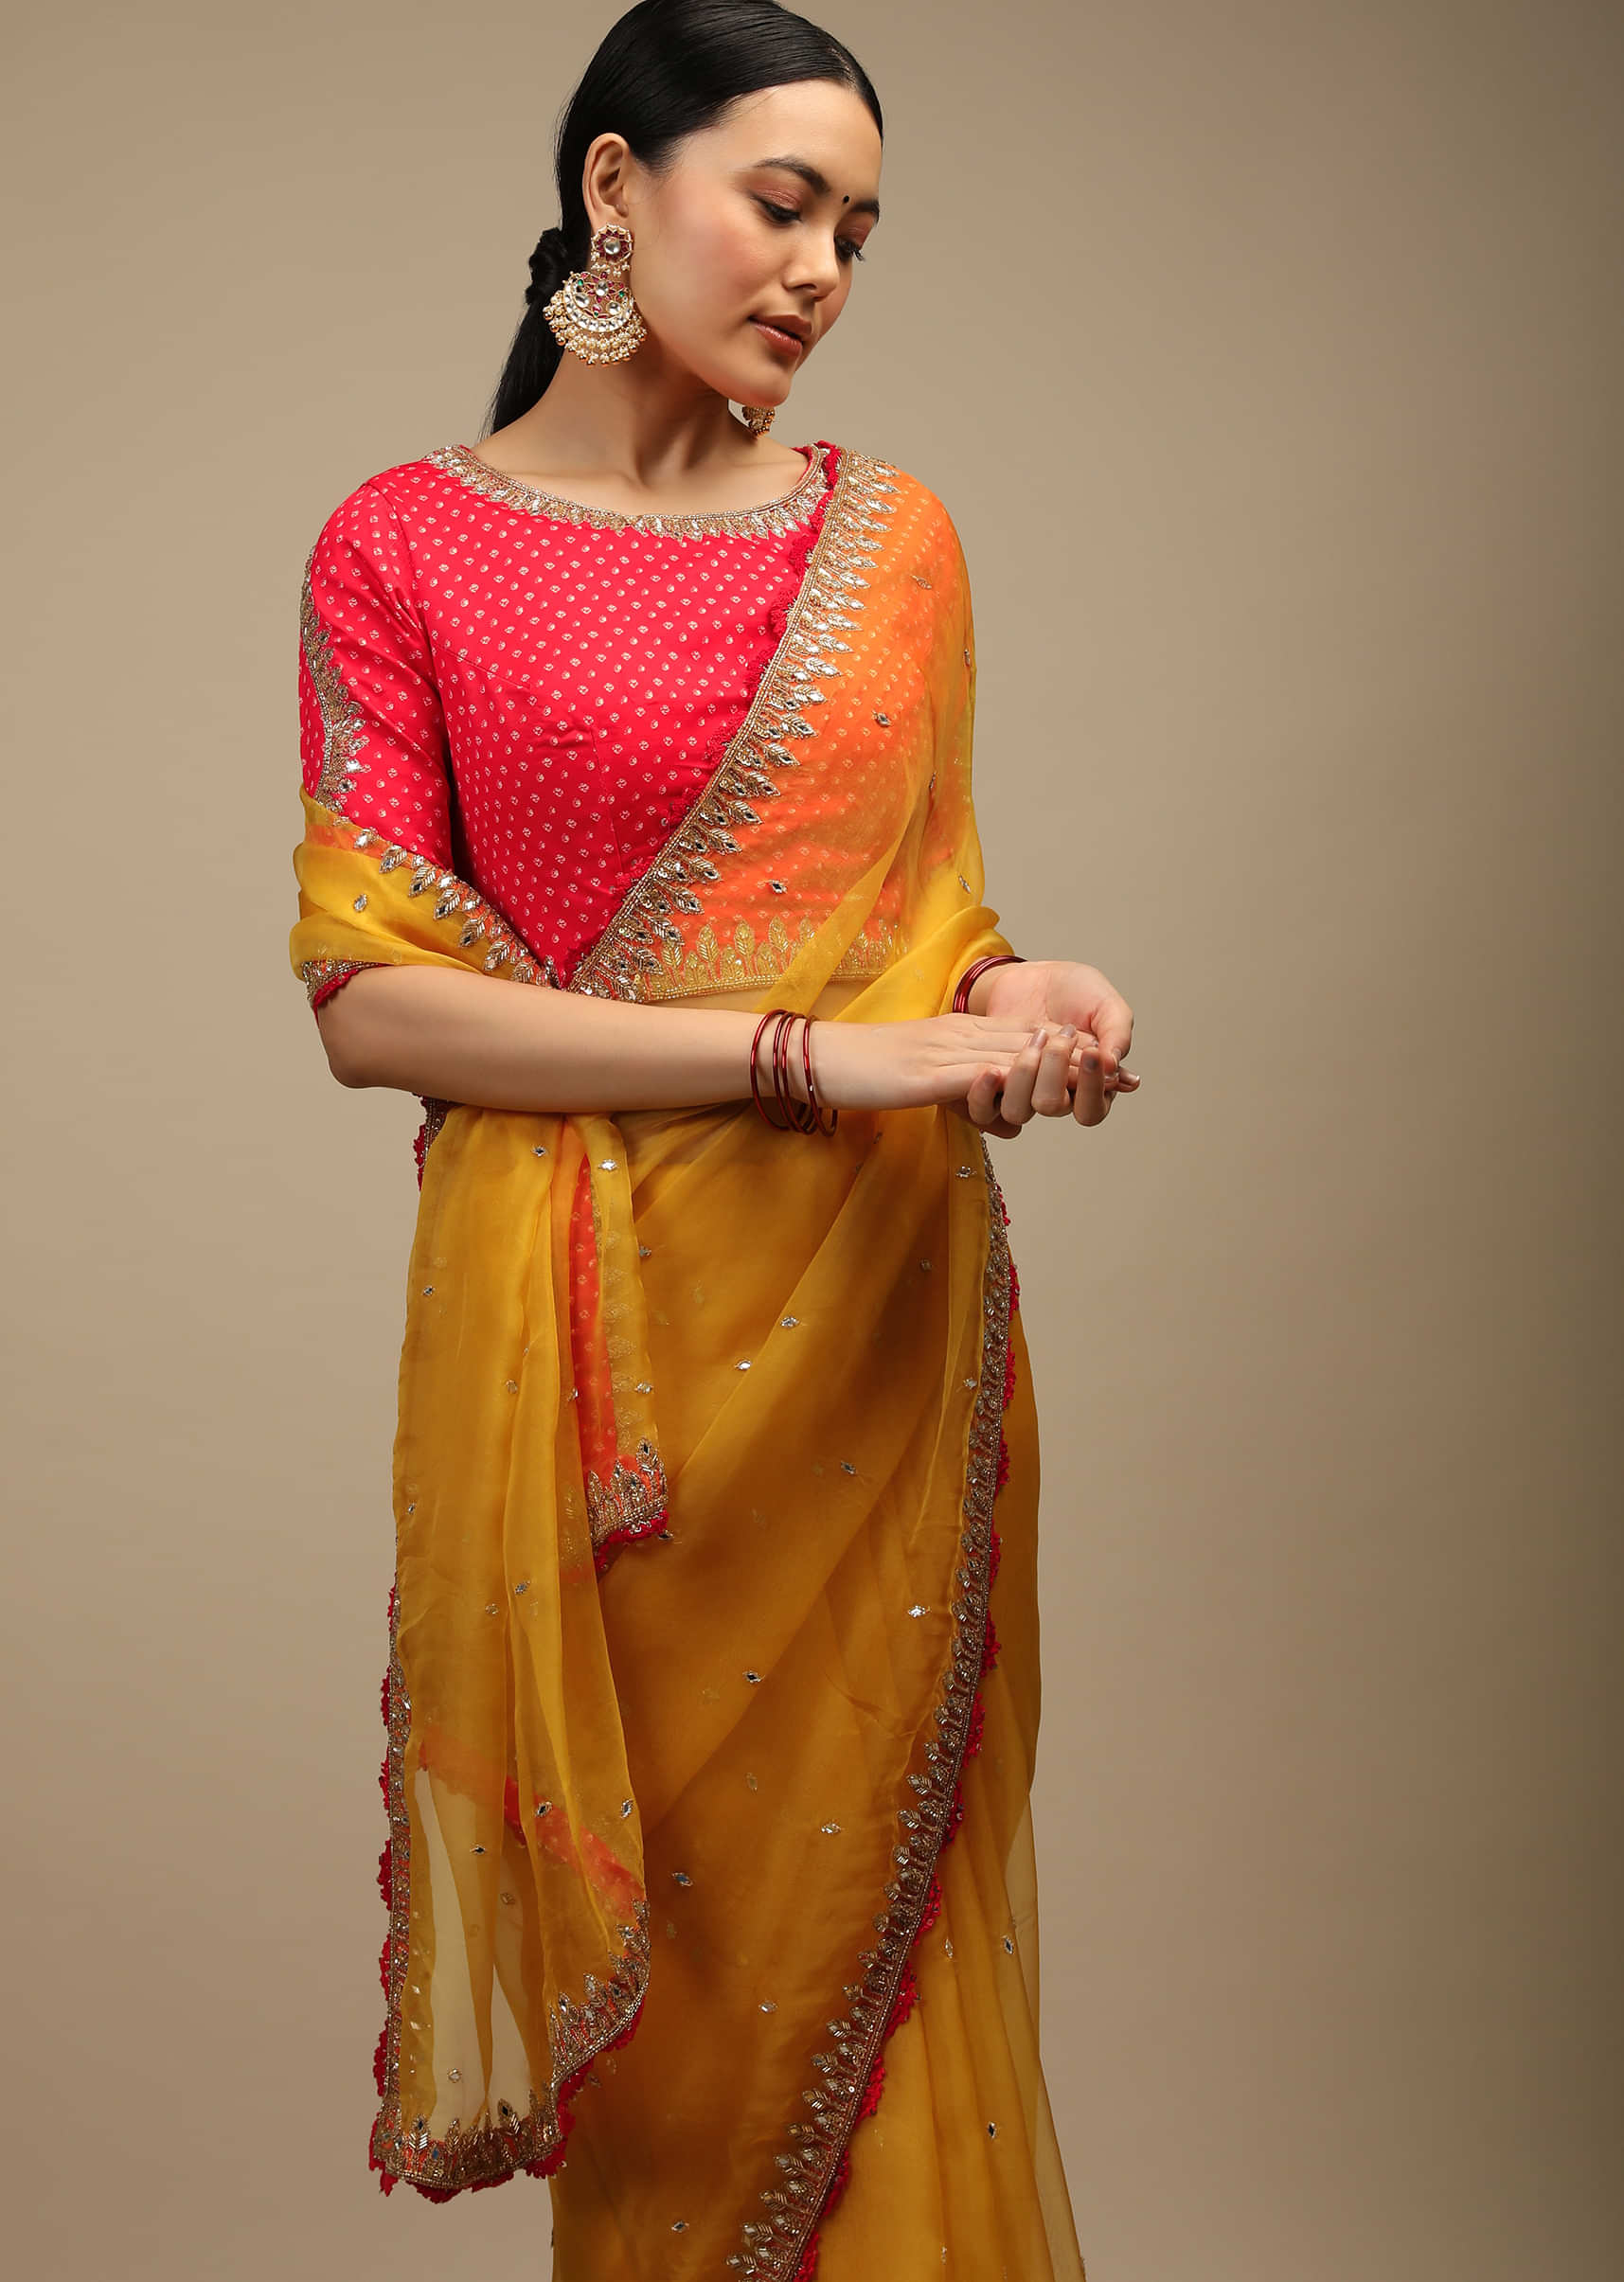 Amber Yellow Saree In Organza With Mirror Work And A Coral Choli Adorned In Bandhani Print  